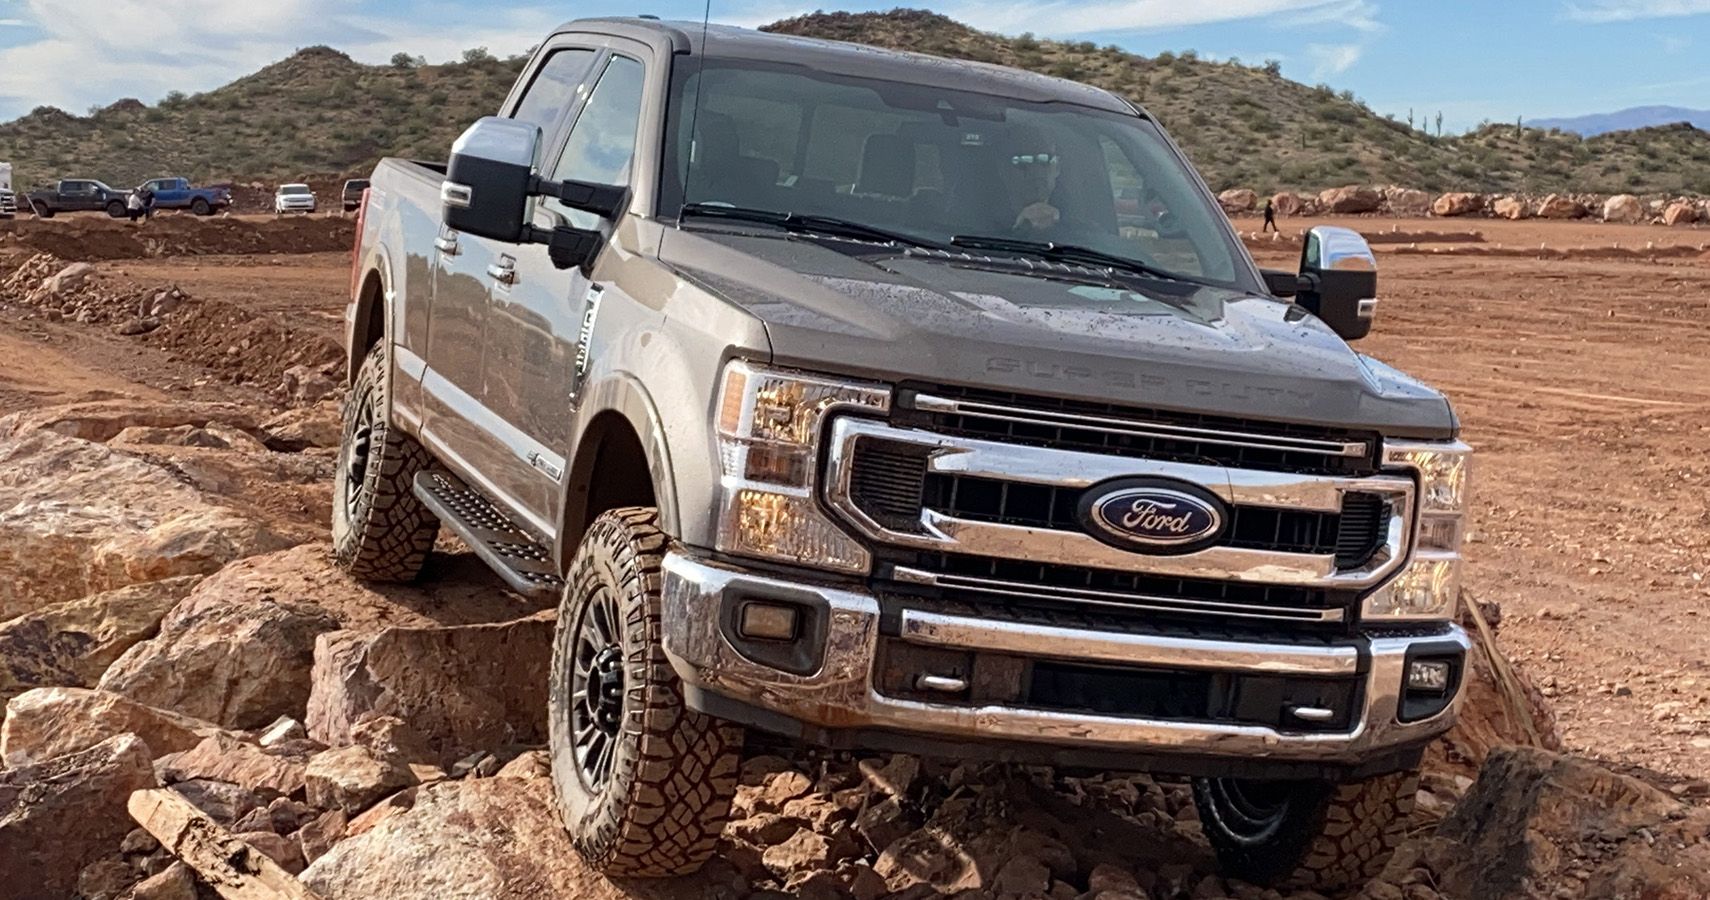 A Ford pickup truck drives in the dirt